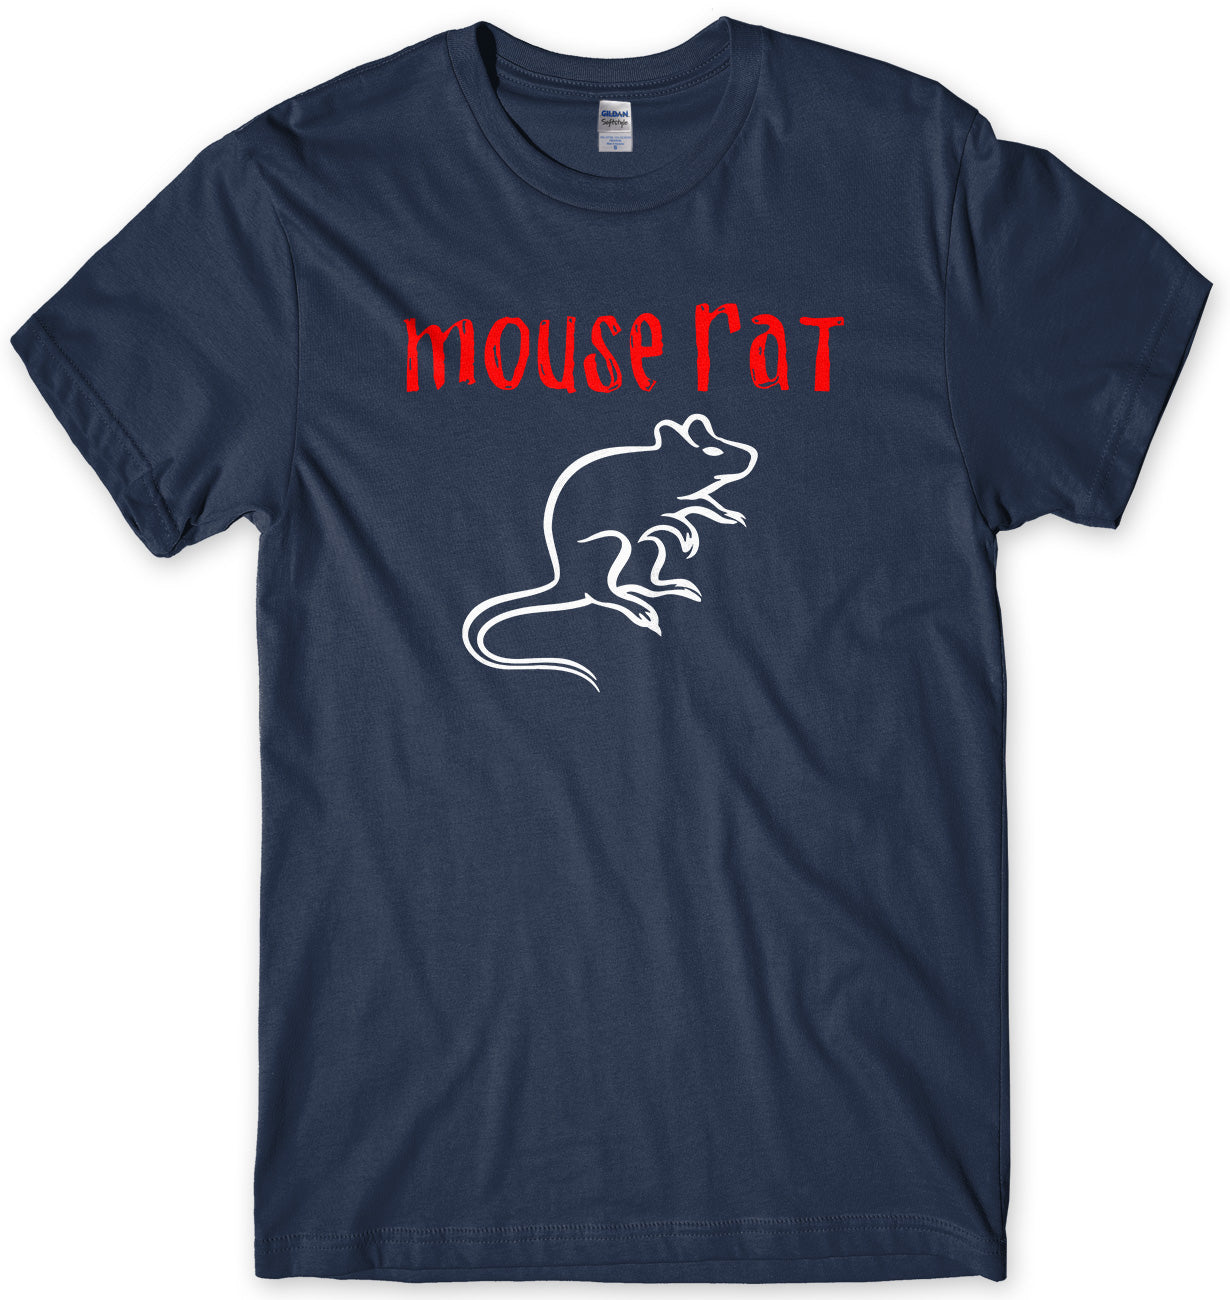 MOUSE RAT - INSPIRED BY PARKS AND RECREATION MENS UNISEX T-SHIRT